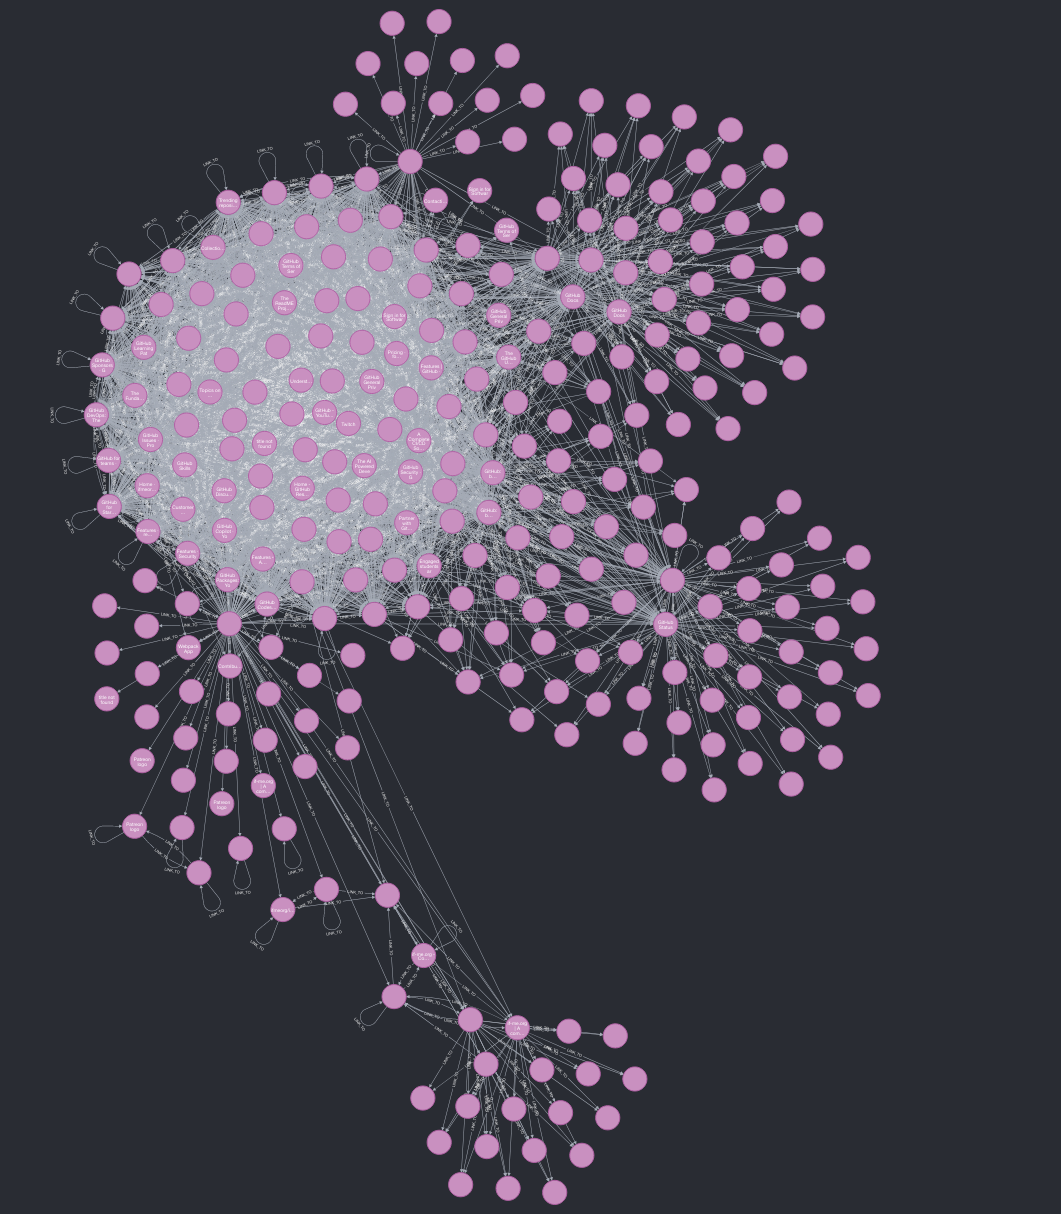 Image of nodes connected in a graph. Showing how pages related to each other